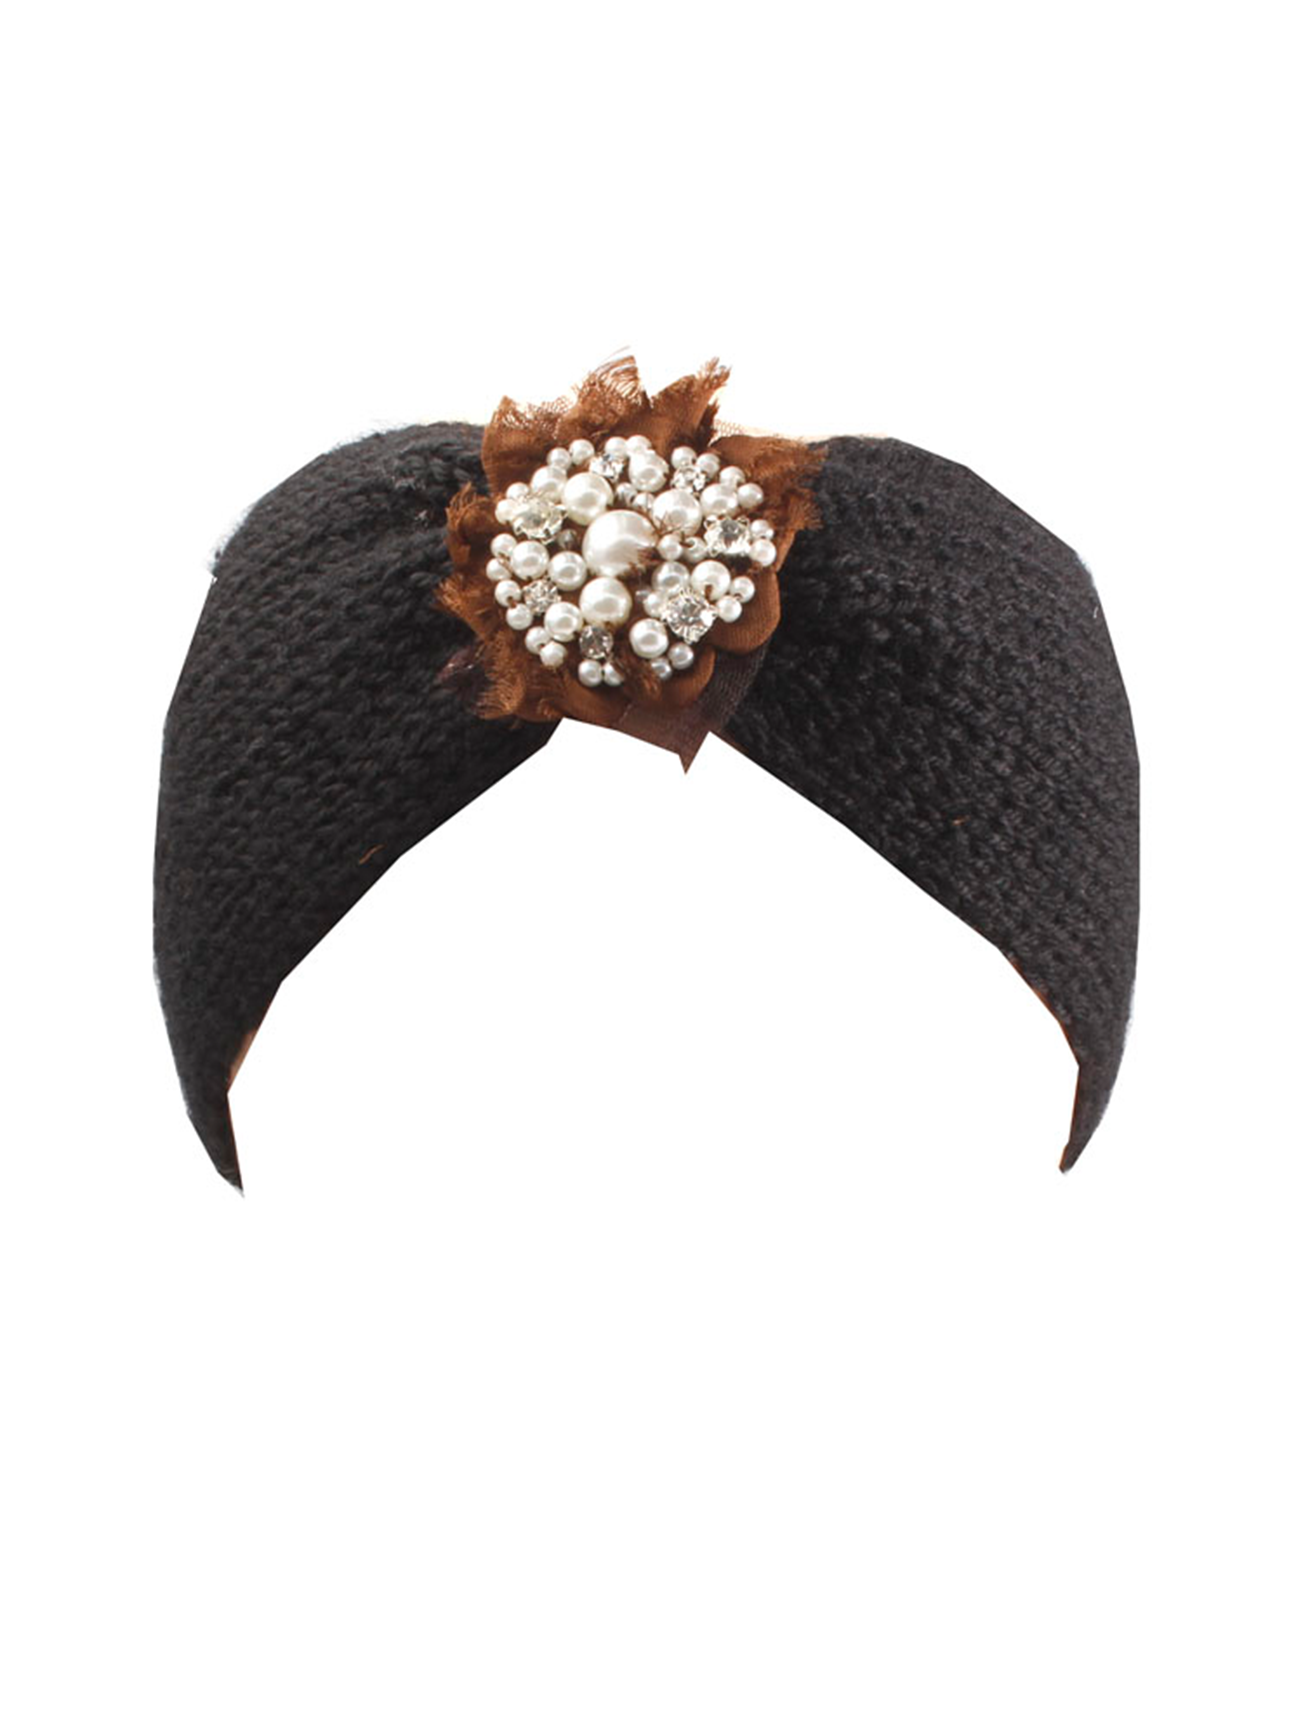 Black Knitted Headband With Pearl and Gem Flower